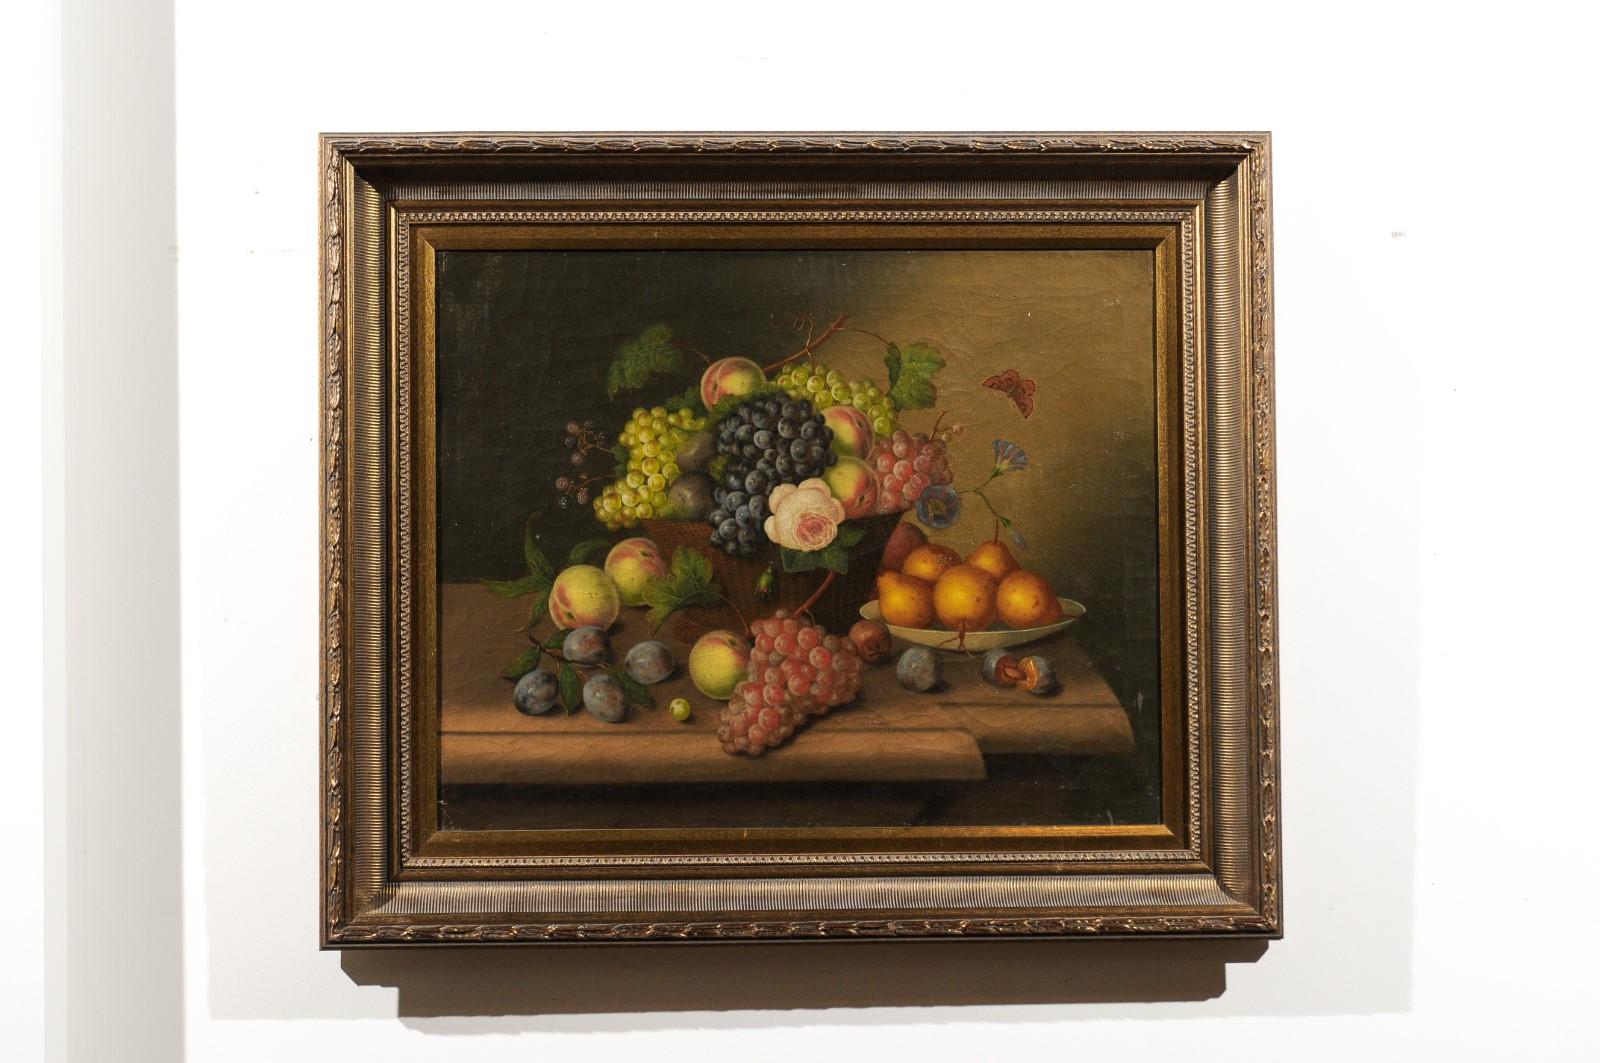 A French framed oil on canvas still-life painting from the 19th century depicting fruits. Born in France during the 19th century, this exquisite still-life painting depicts an abundance of mouth-watering fruits presented in a wicker basket and a